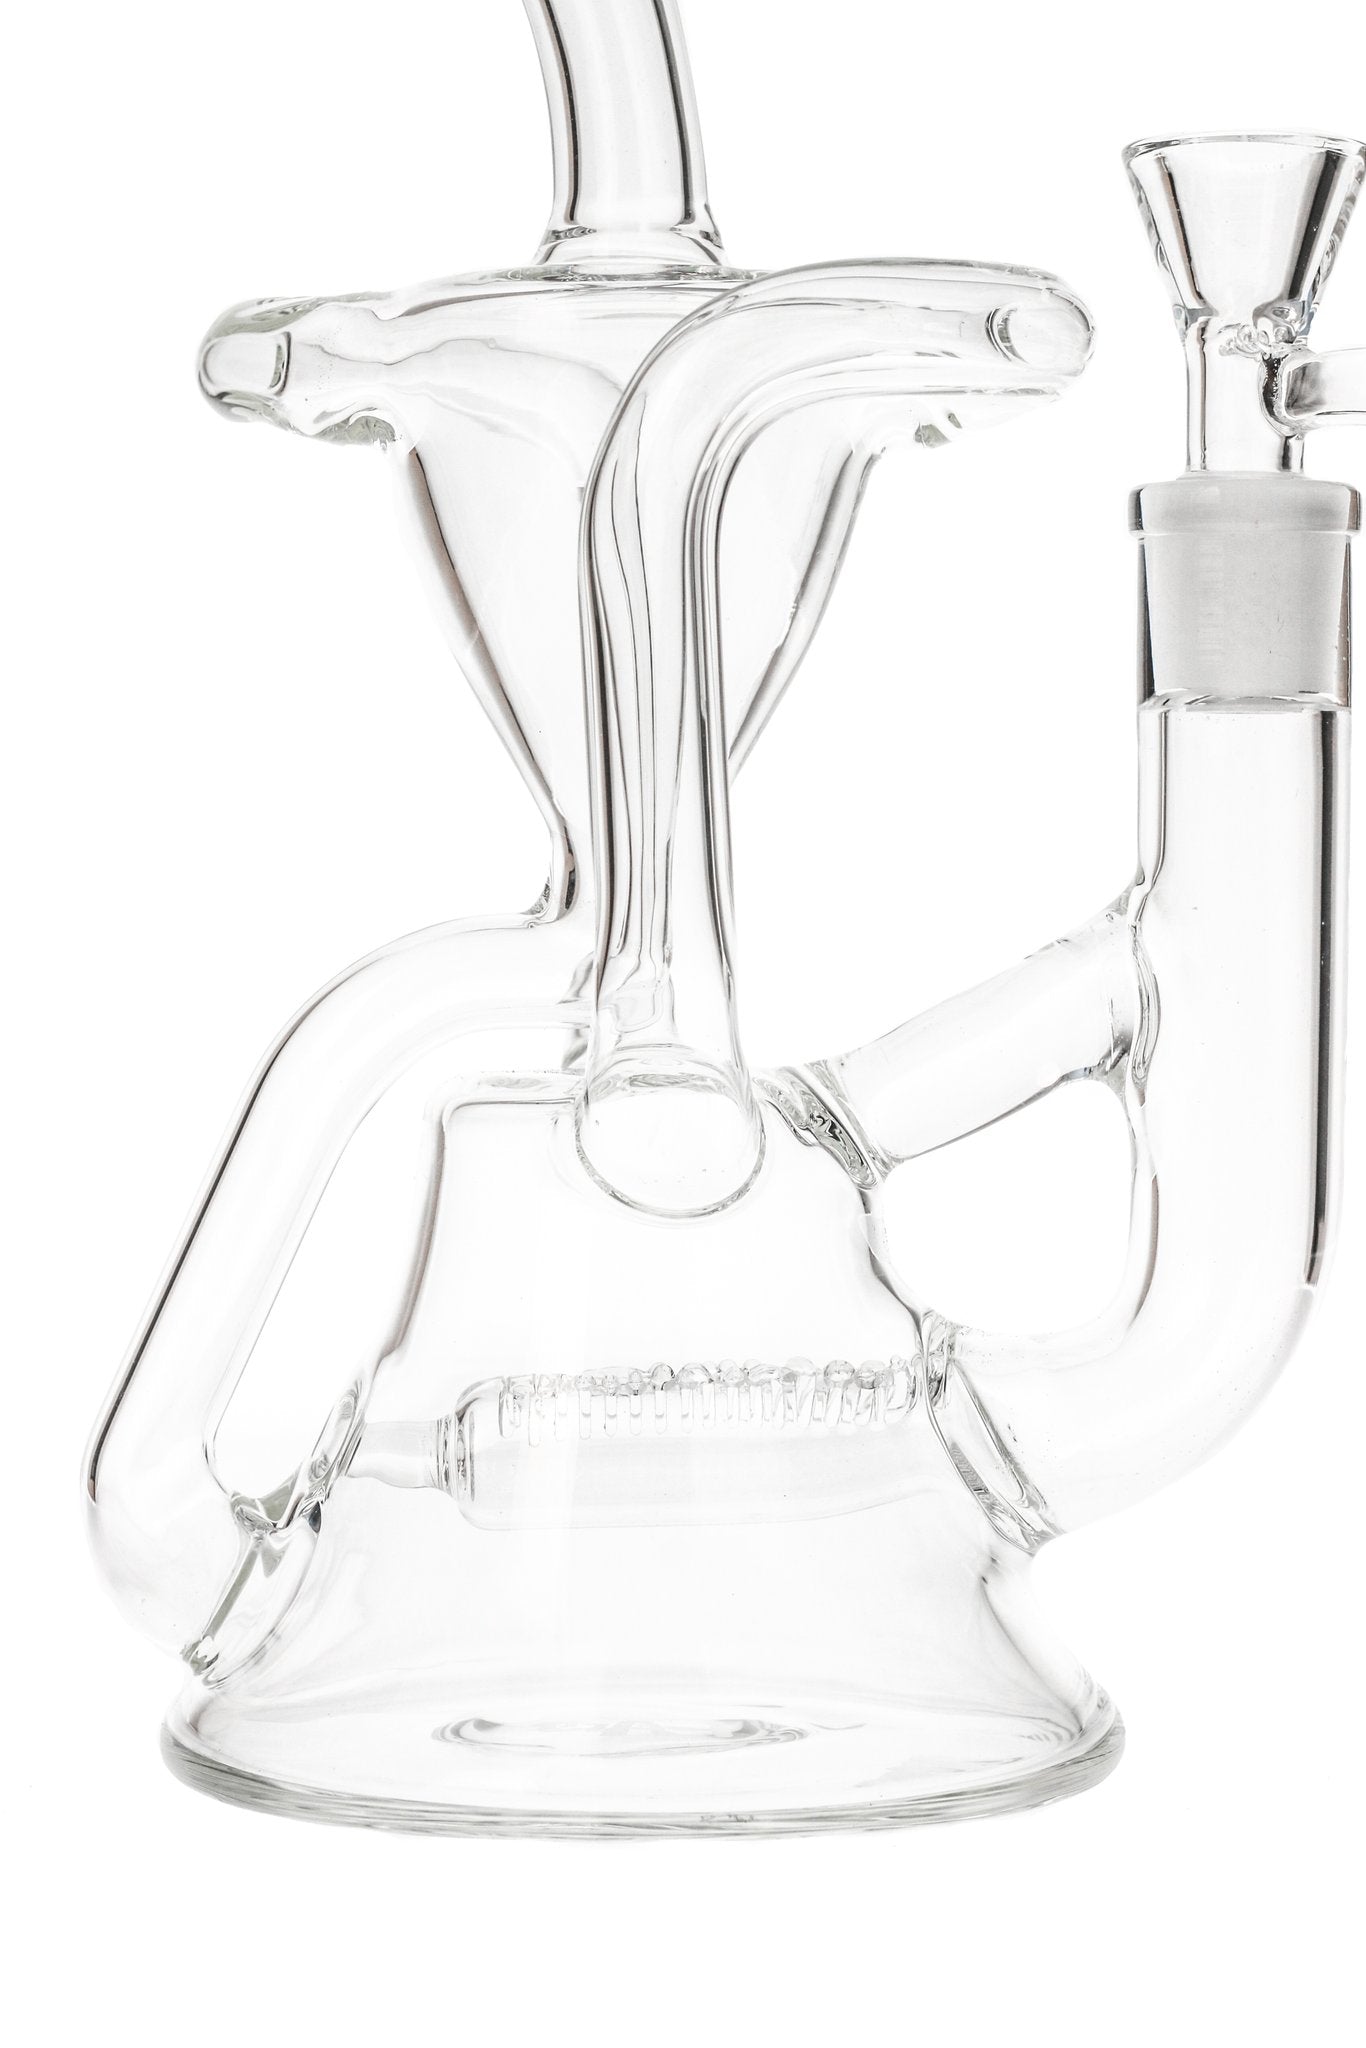 Glass Accessories for Bongs and Water Pipes – Aqua Lab Technologies